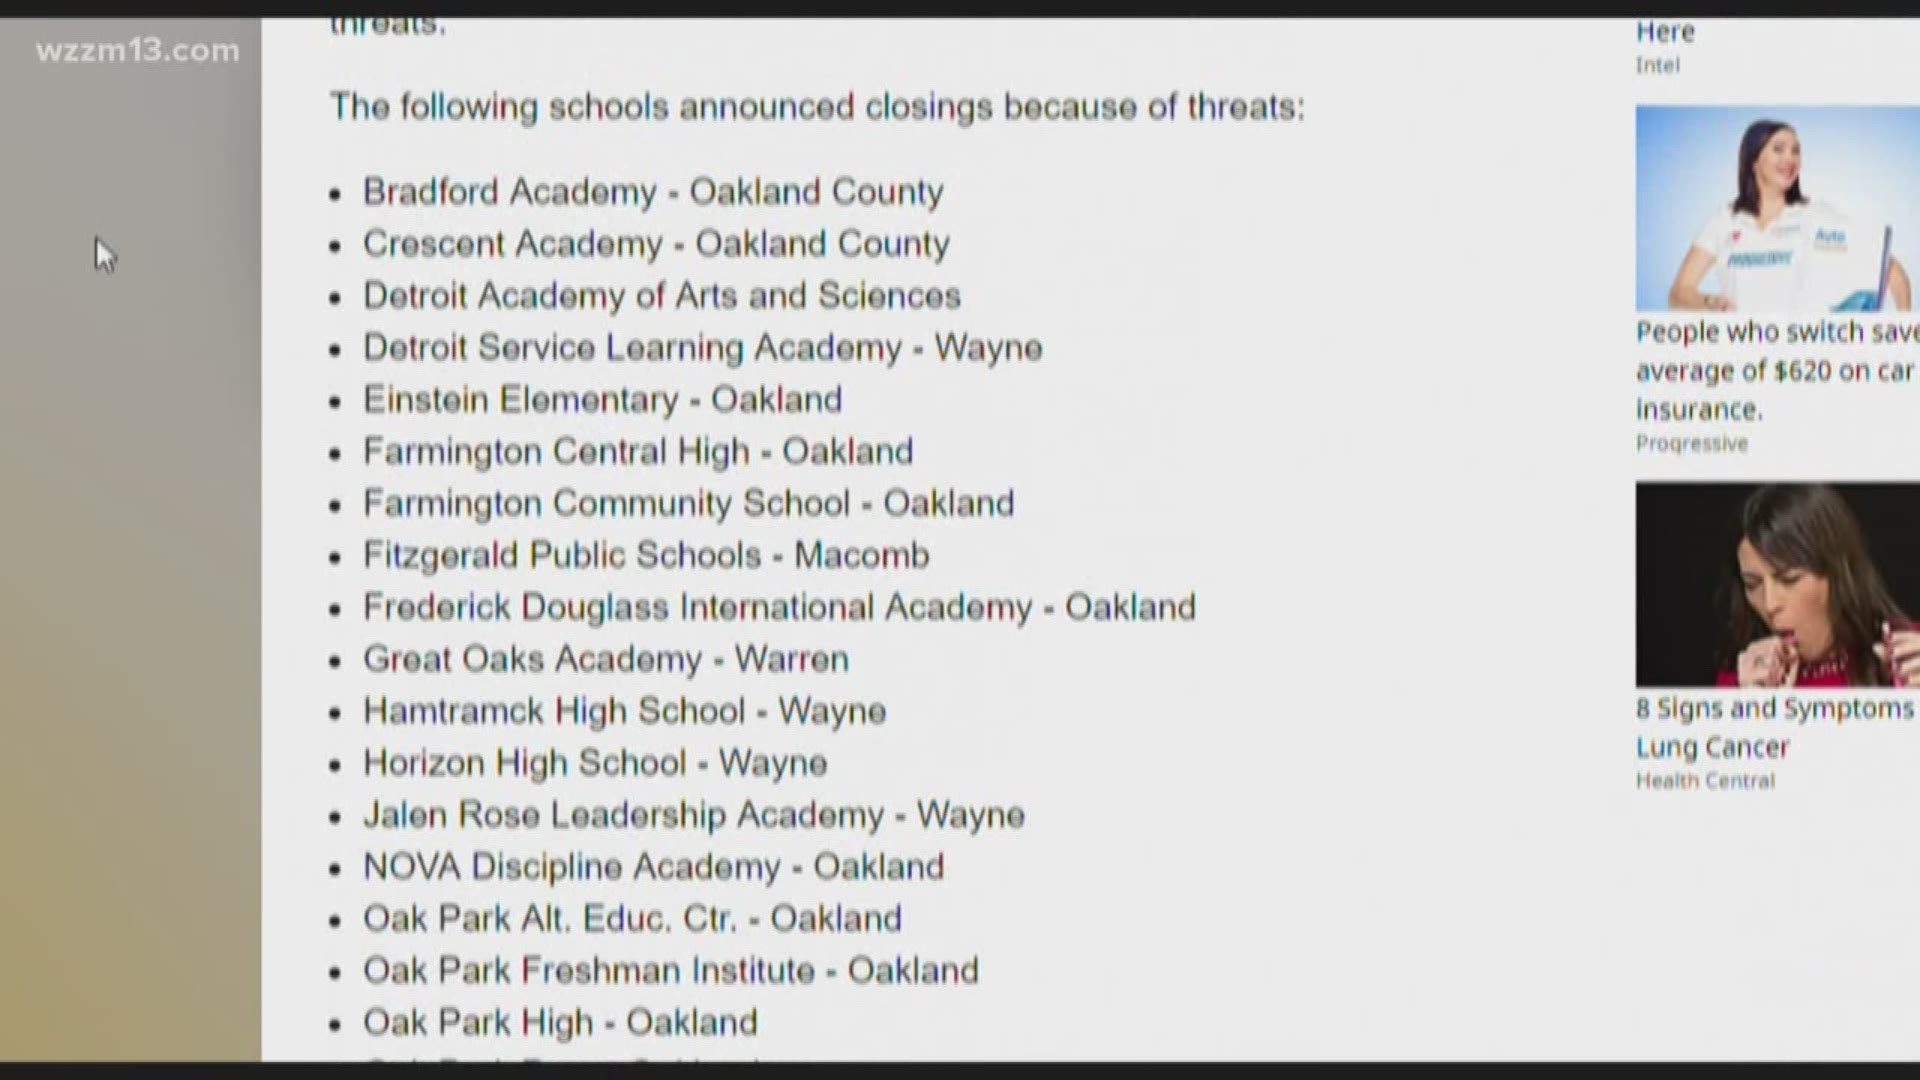 Many schools closed in Metro Detroit due to threats